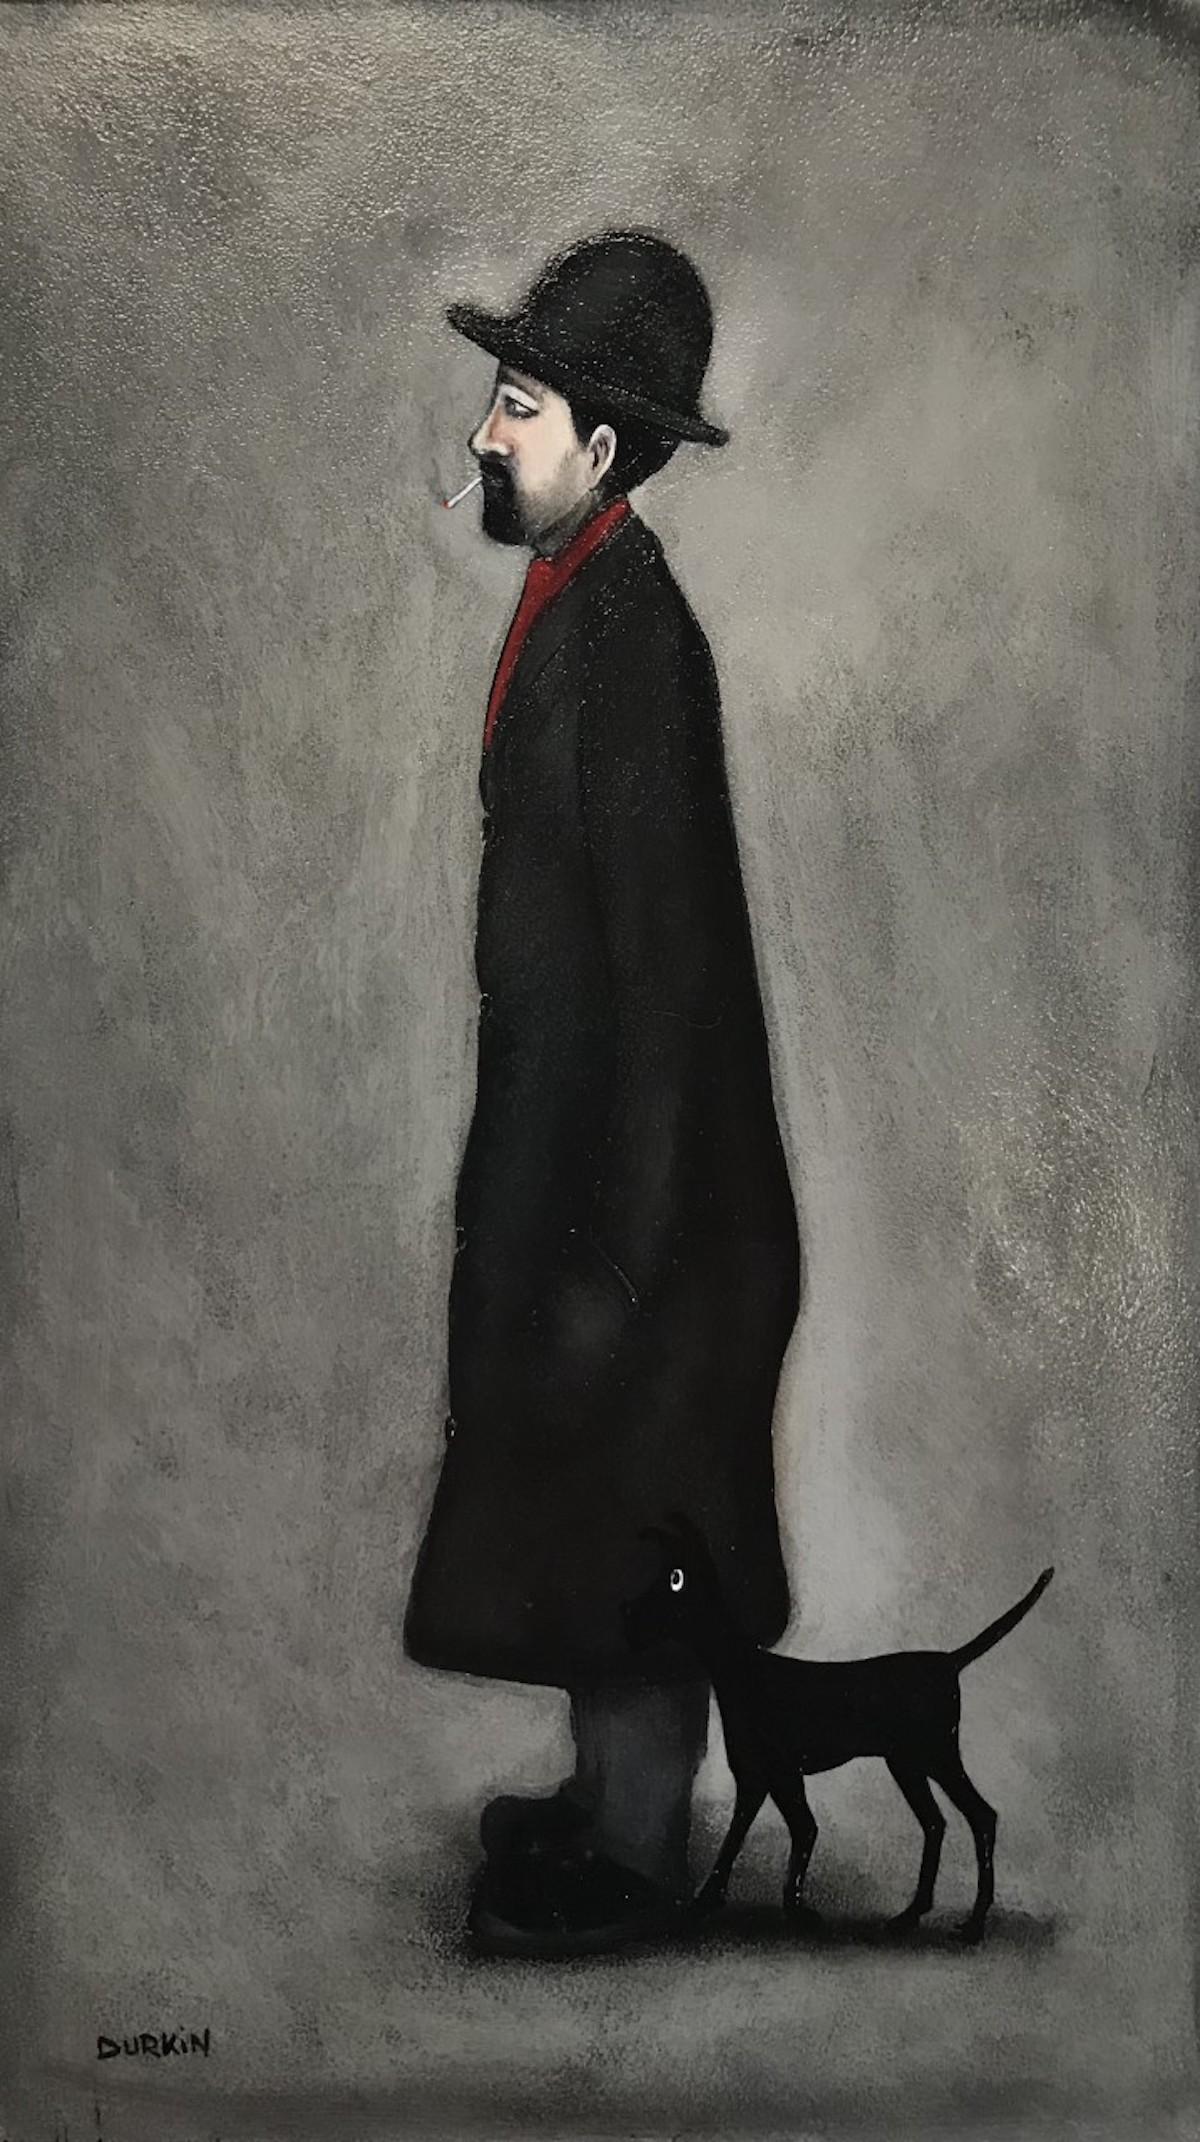 Sean Durkin  Portrait Painting - The man with the red scarf and dog by Sean Durkin, Lowry Inspired, Folk Art